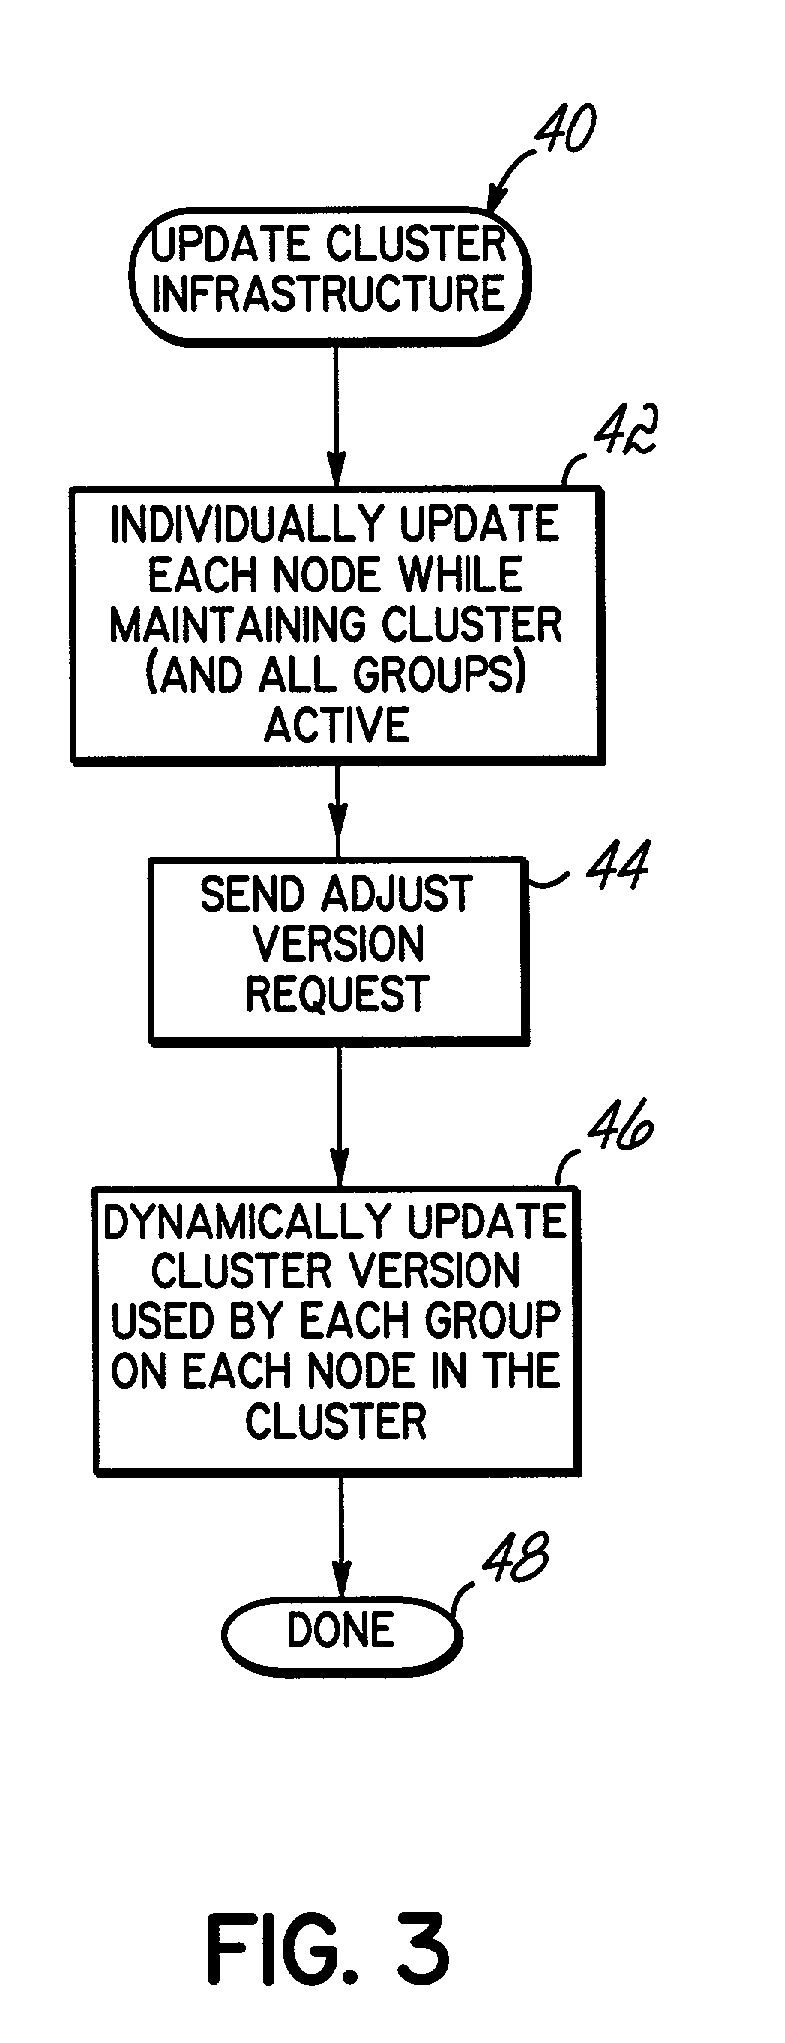 Dynamic cluster versioning for a group